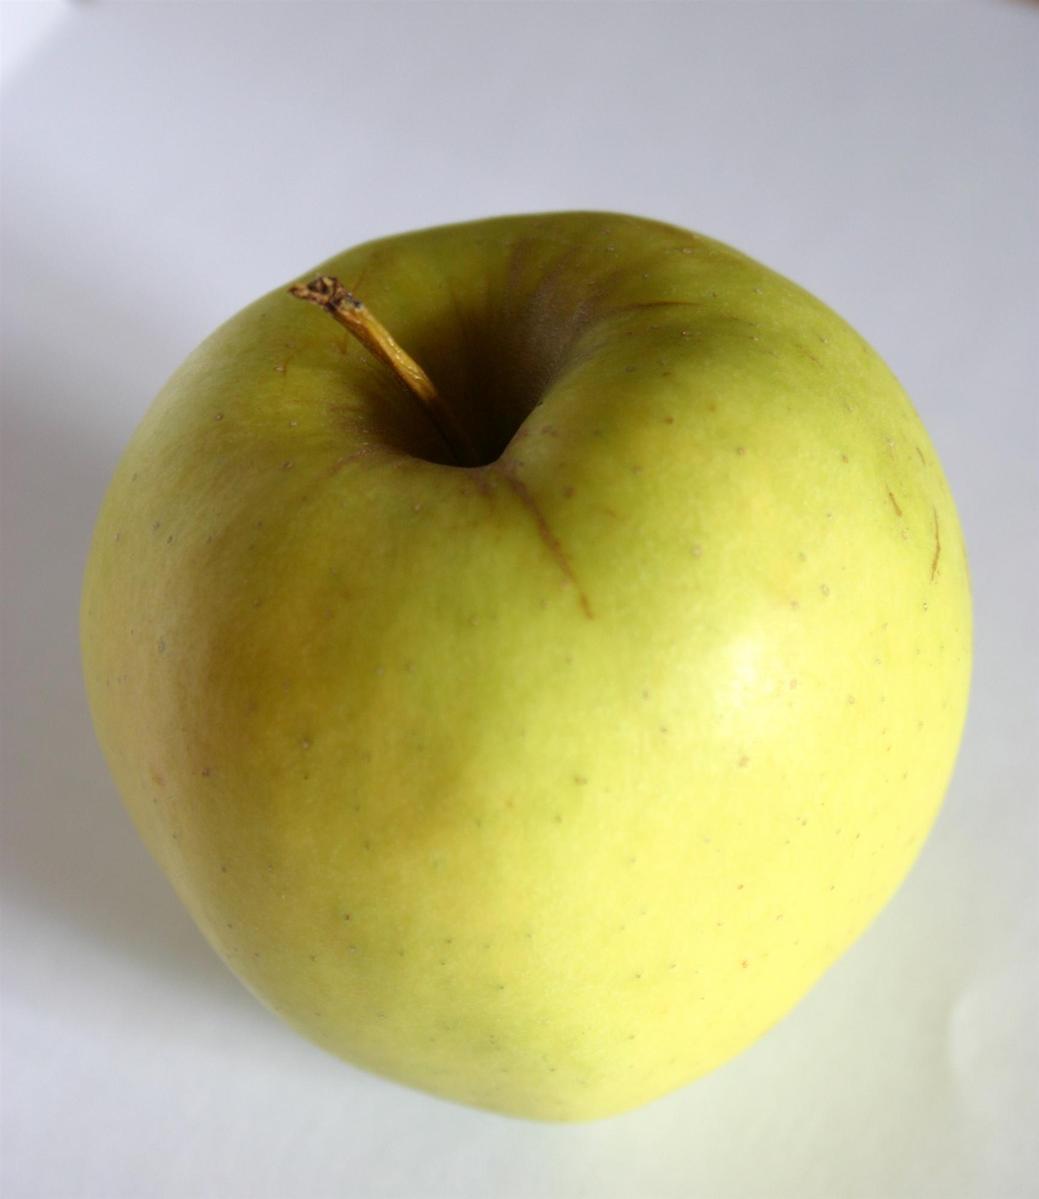 the top of a green apple on a white surface